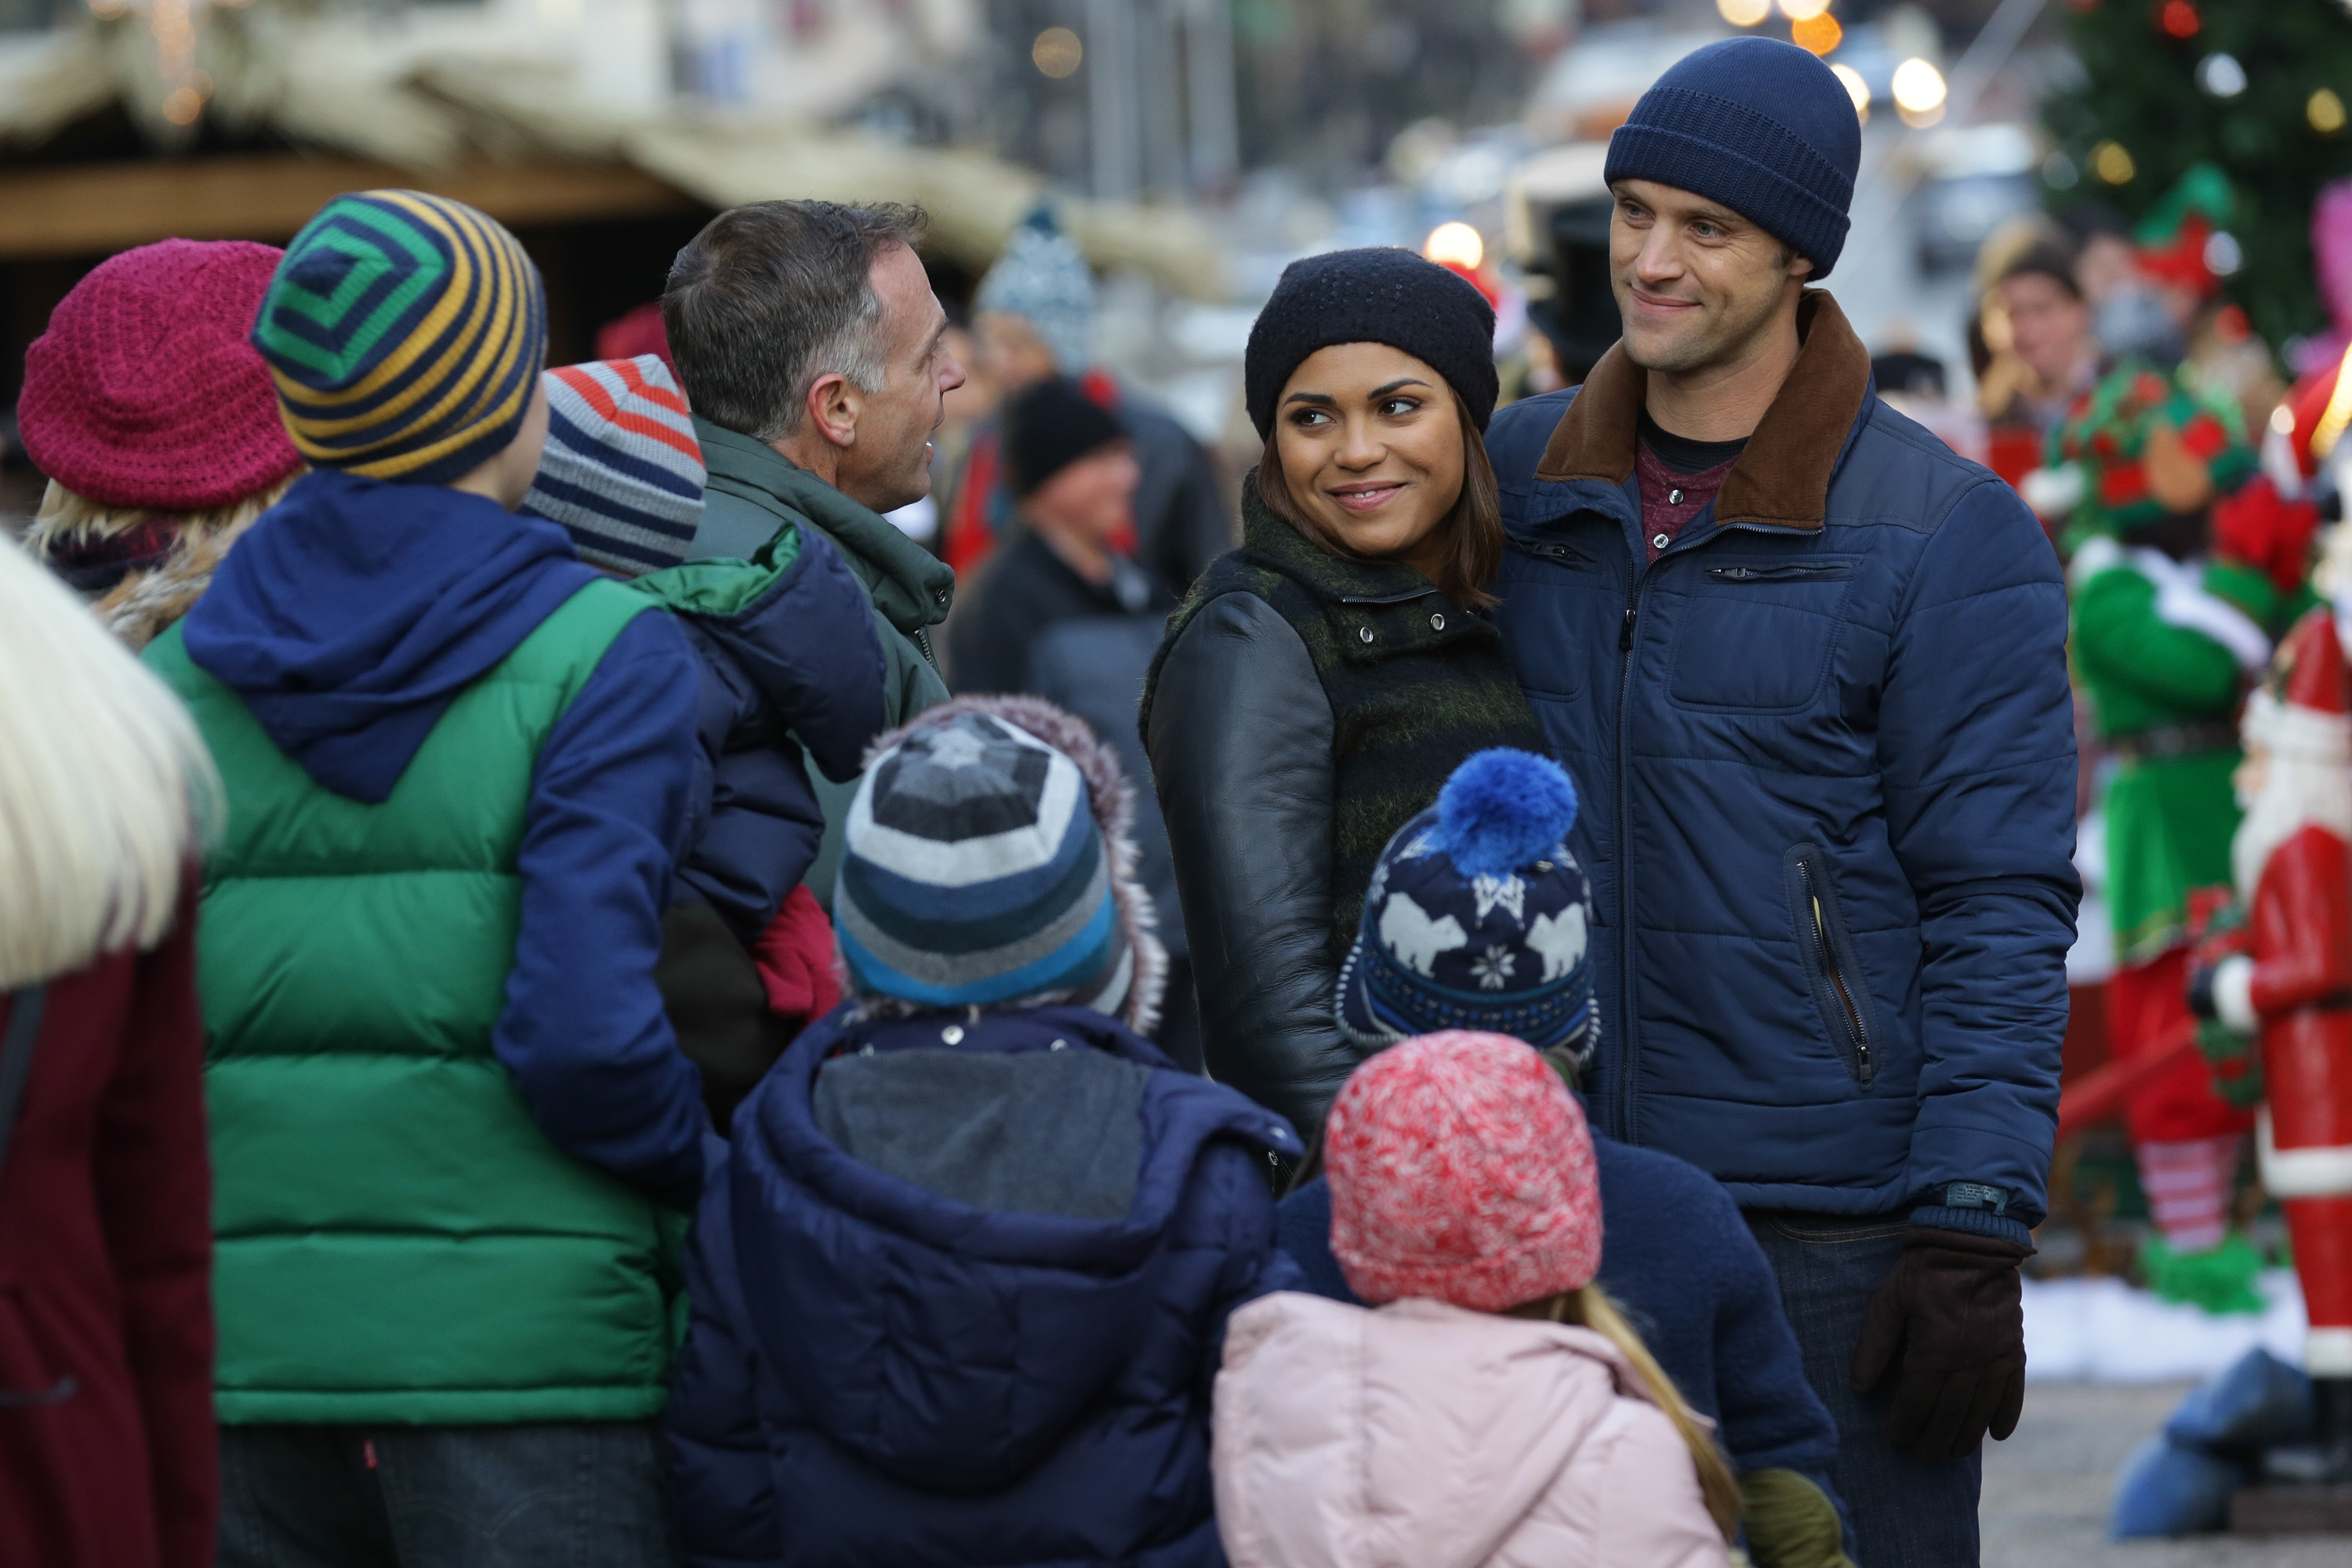 Christopher Herrmann, Gabriela Dawson, and Matthew Casey in 'Chicago Fire' Season 3. The characters are dressed warmly outdoors and smiling in a crowd.